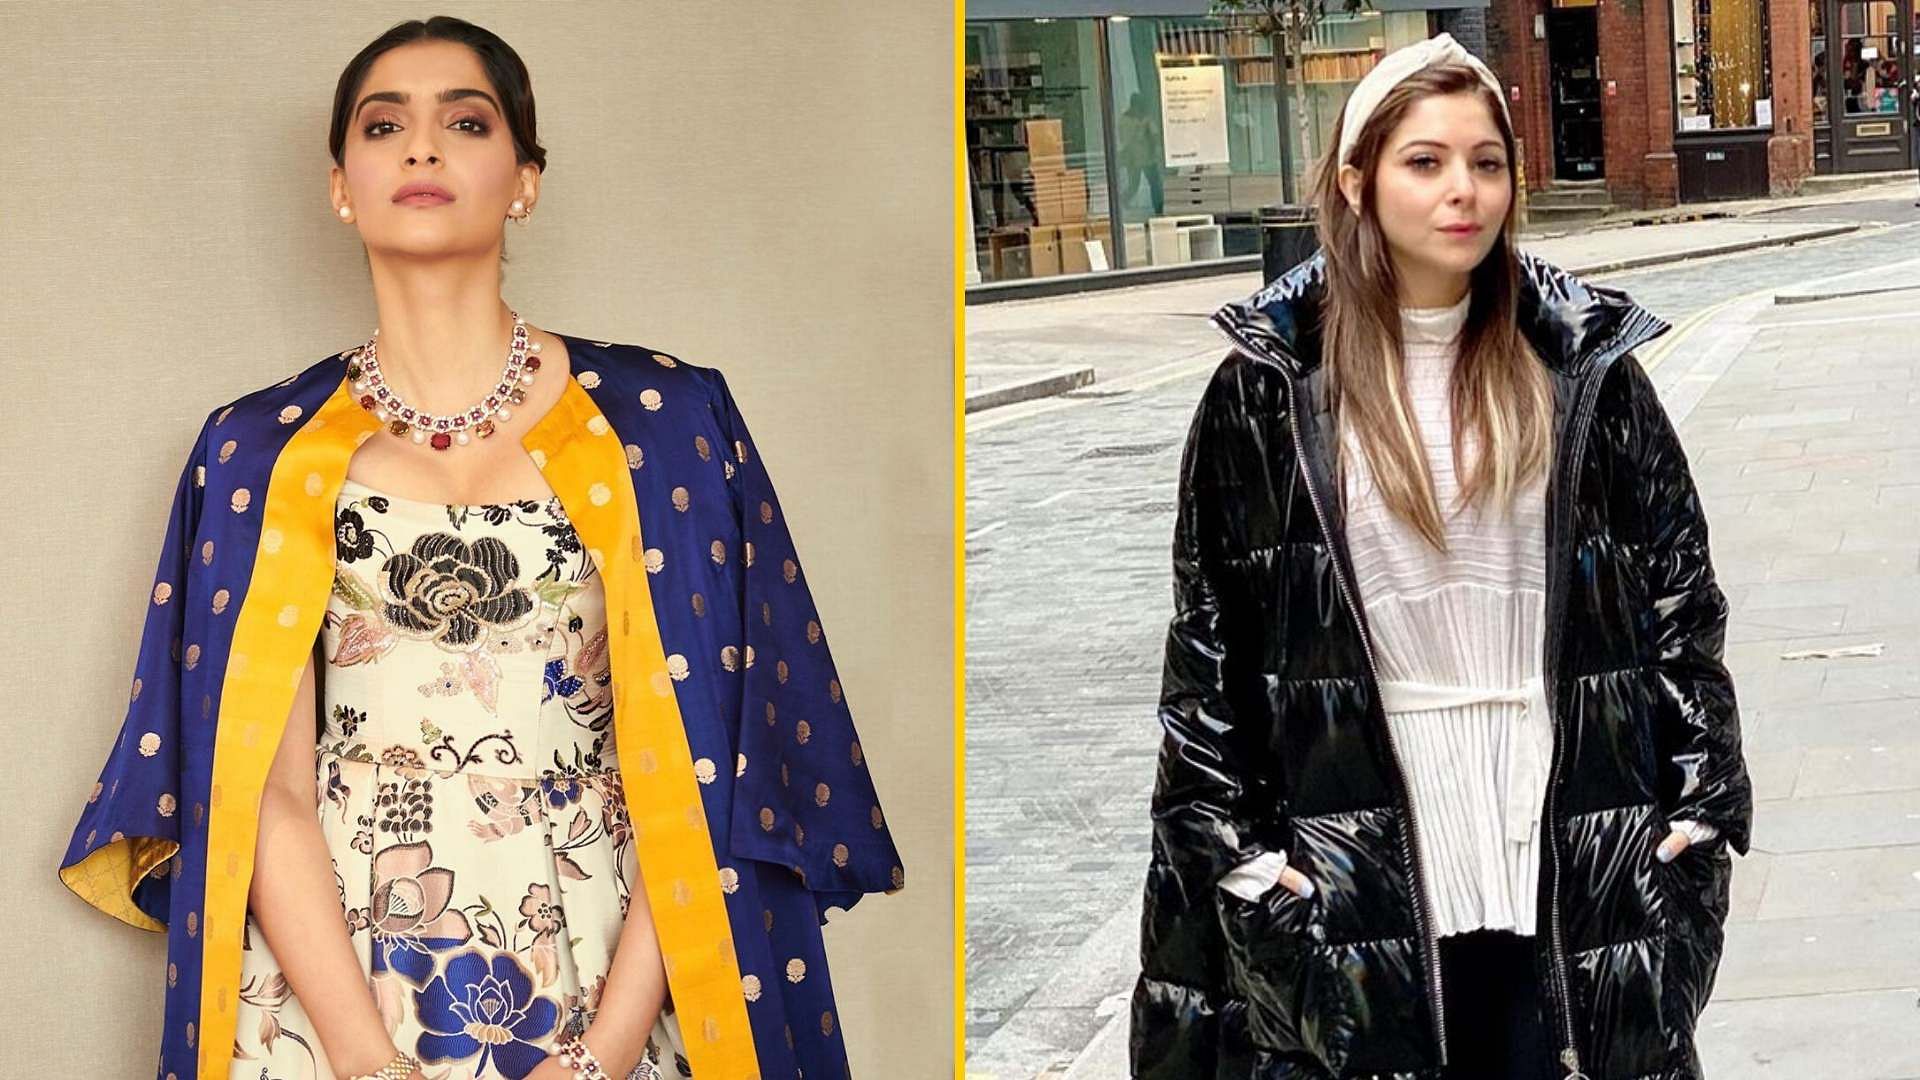 Sonam Kapoor has said singer Kanika Kapoor is deserving of empathy rather than criticism.